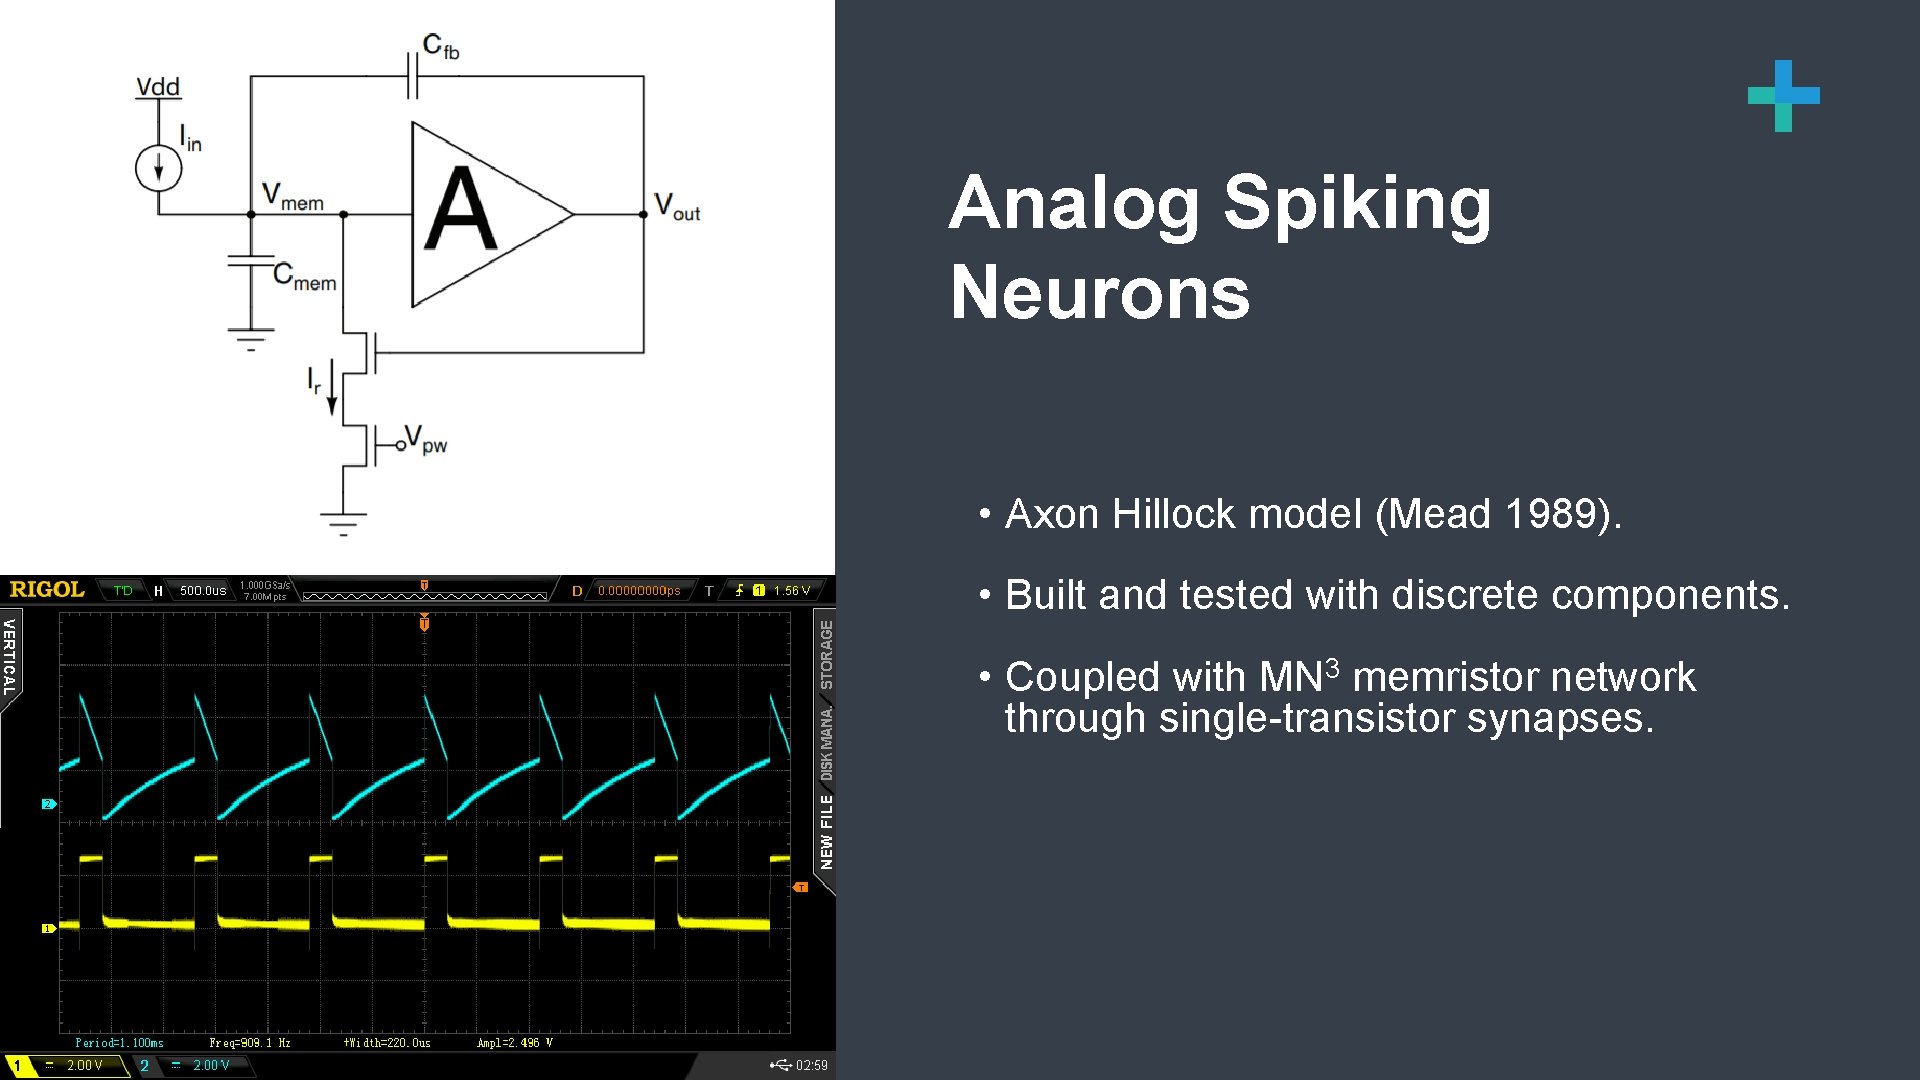 8 Analog Spiking Neurons • Axon Hillock model (Mead 1989). • Built and tested